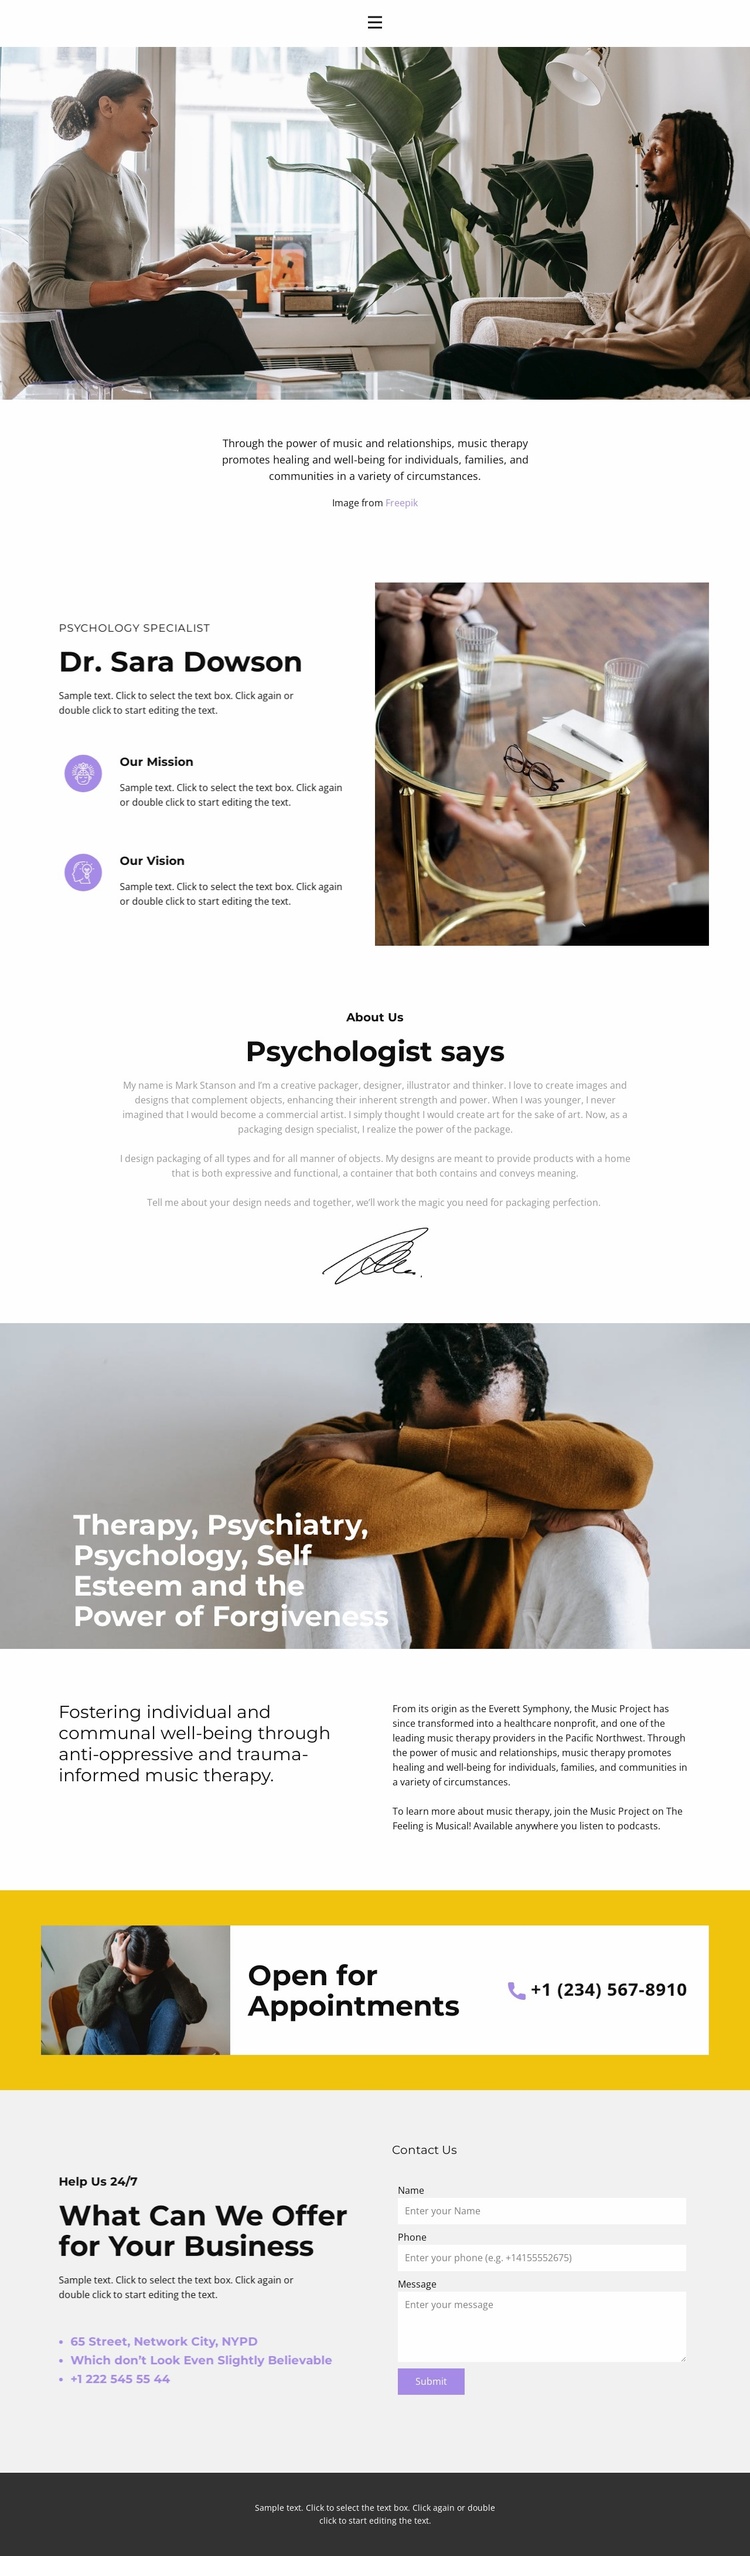 Qualified help from a psychologist Ecommerce Website Design